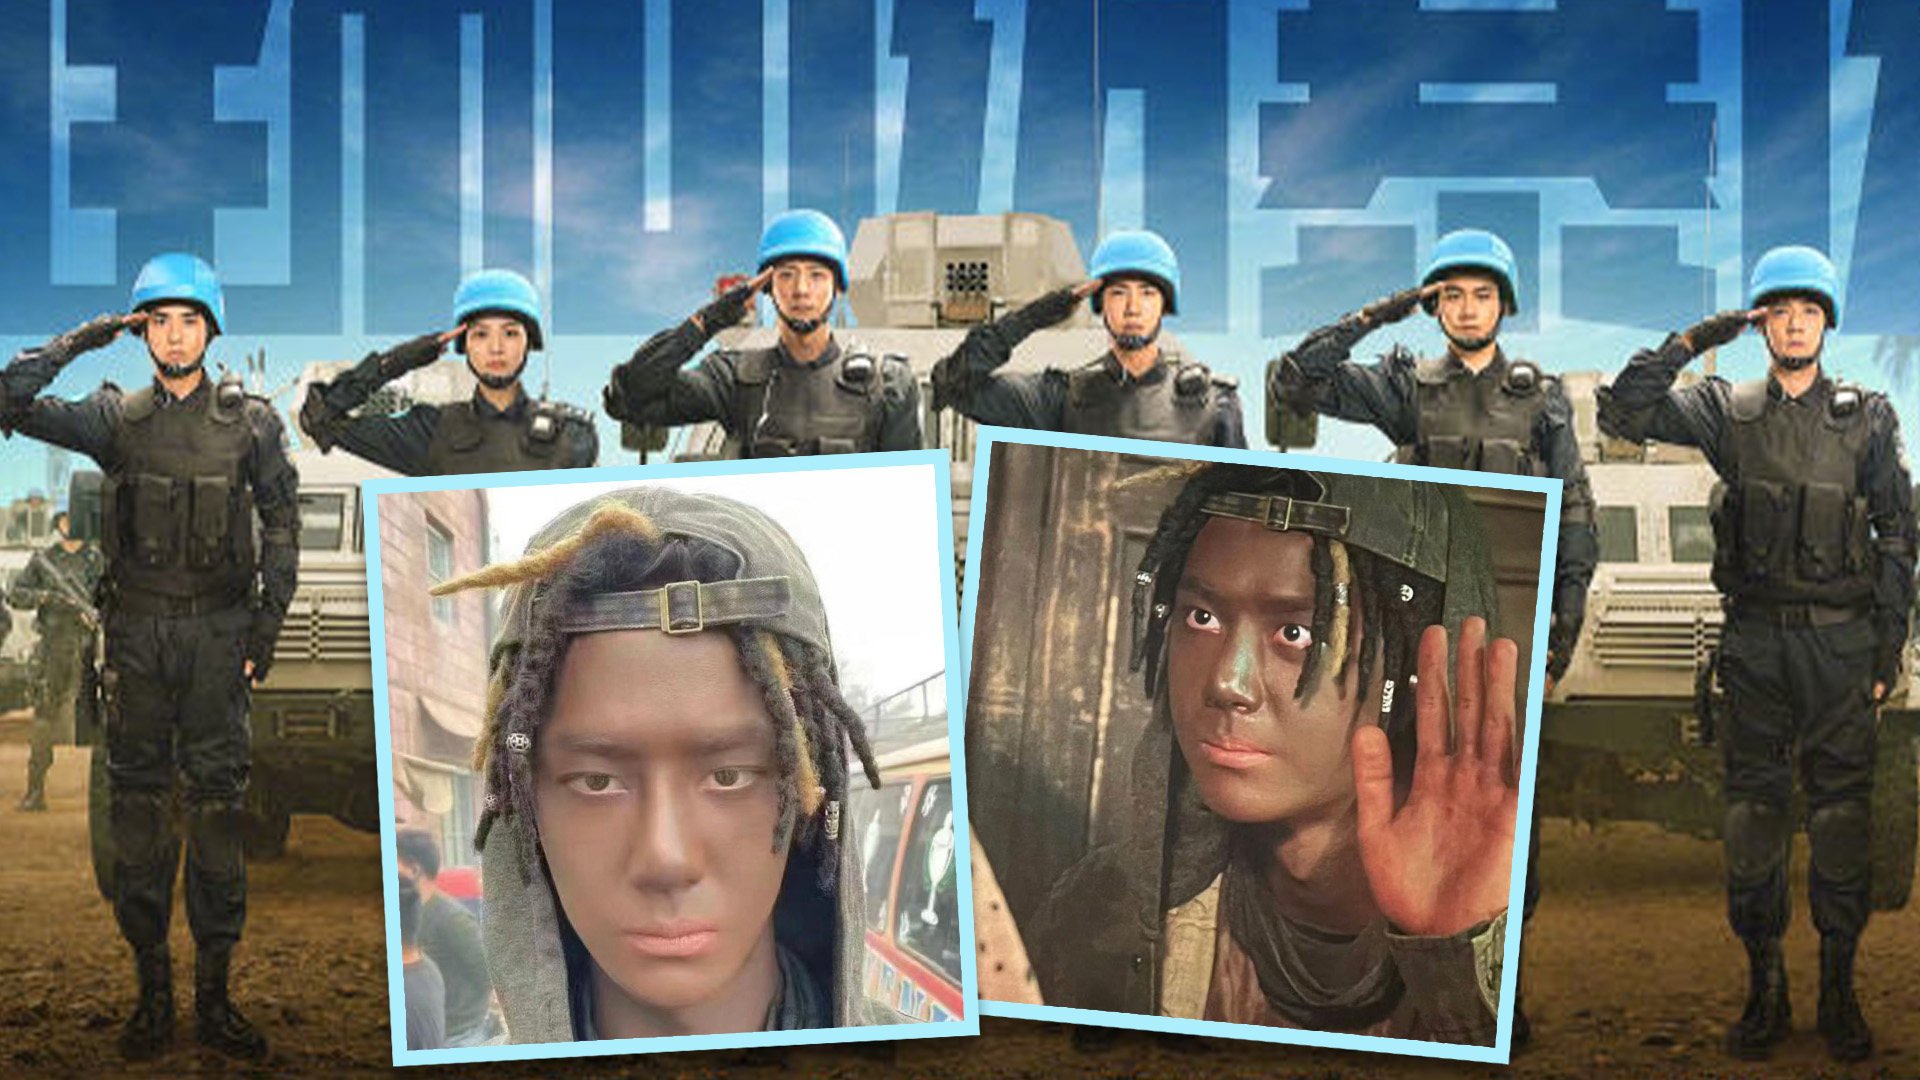 Two top actors from China are facing online criticism for using blackface makeup in a film about Chinese peacekeepers in Africa. Photo: SCMP composite/Weibo/X.com